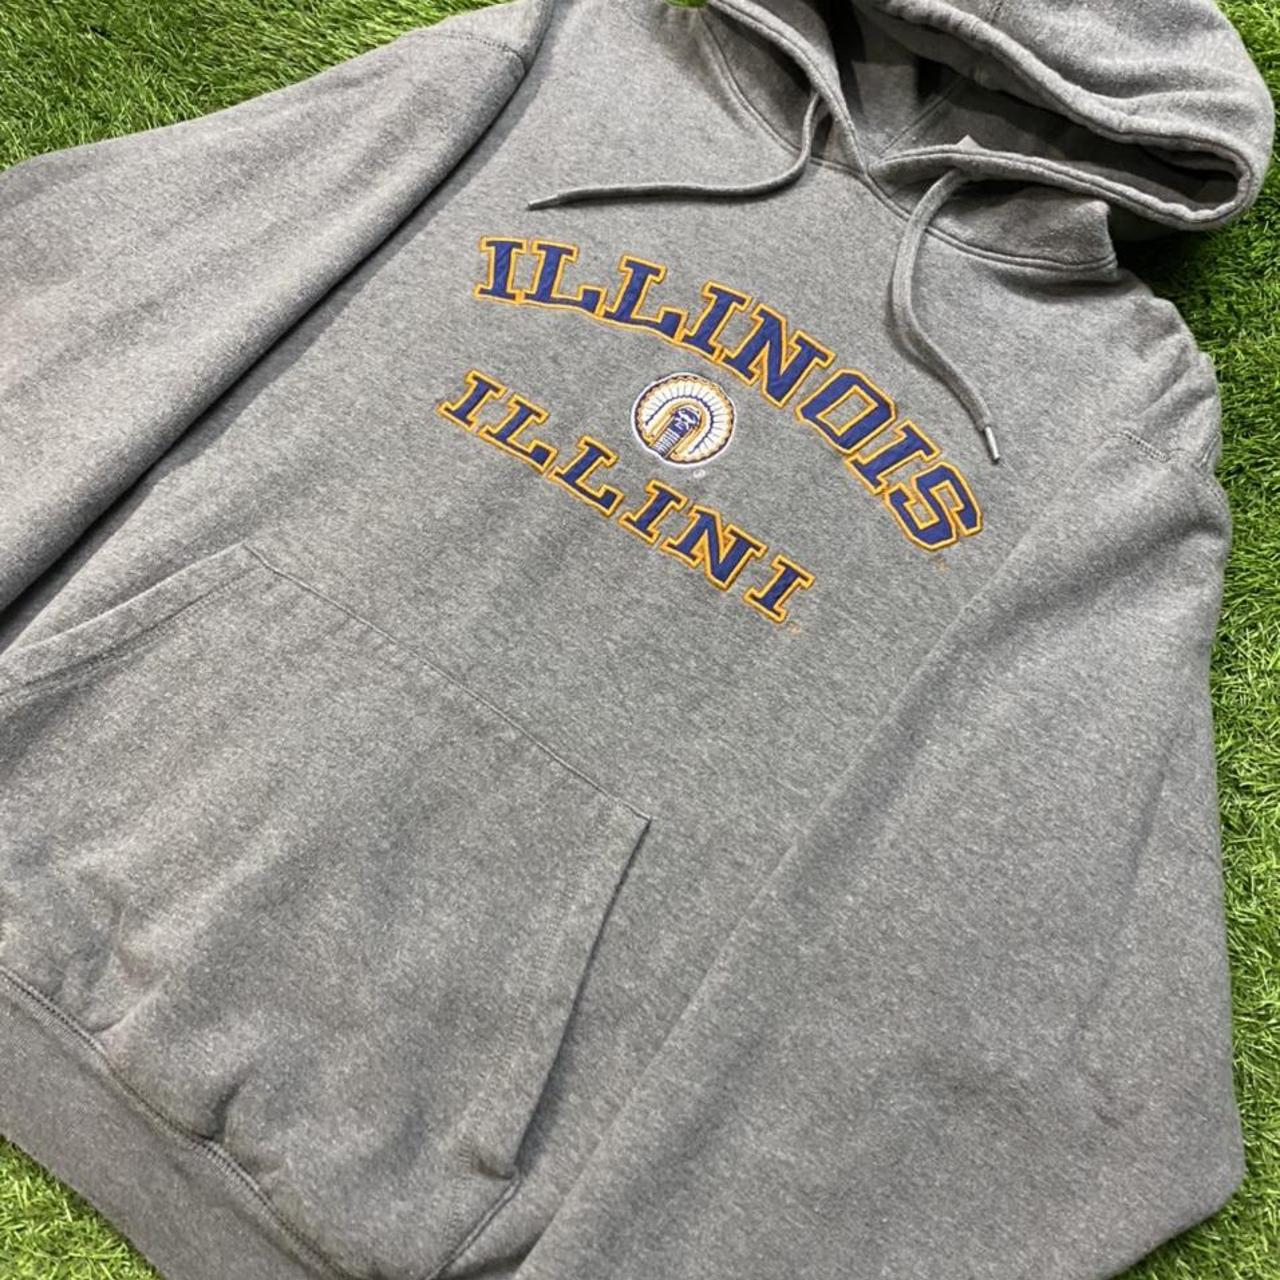 Product Image 2 - Vintage University of Illinois Hoodie!
Condition: